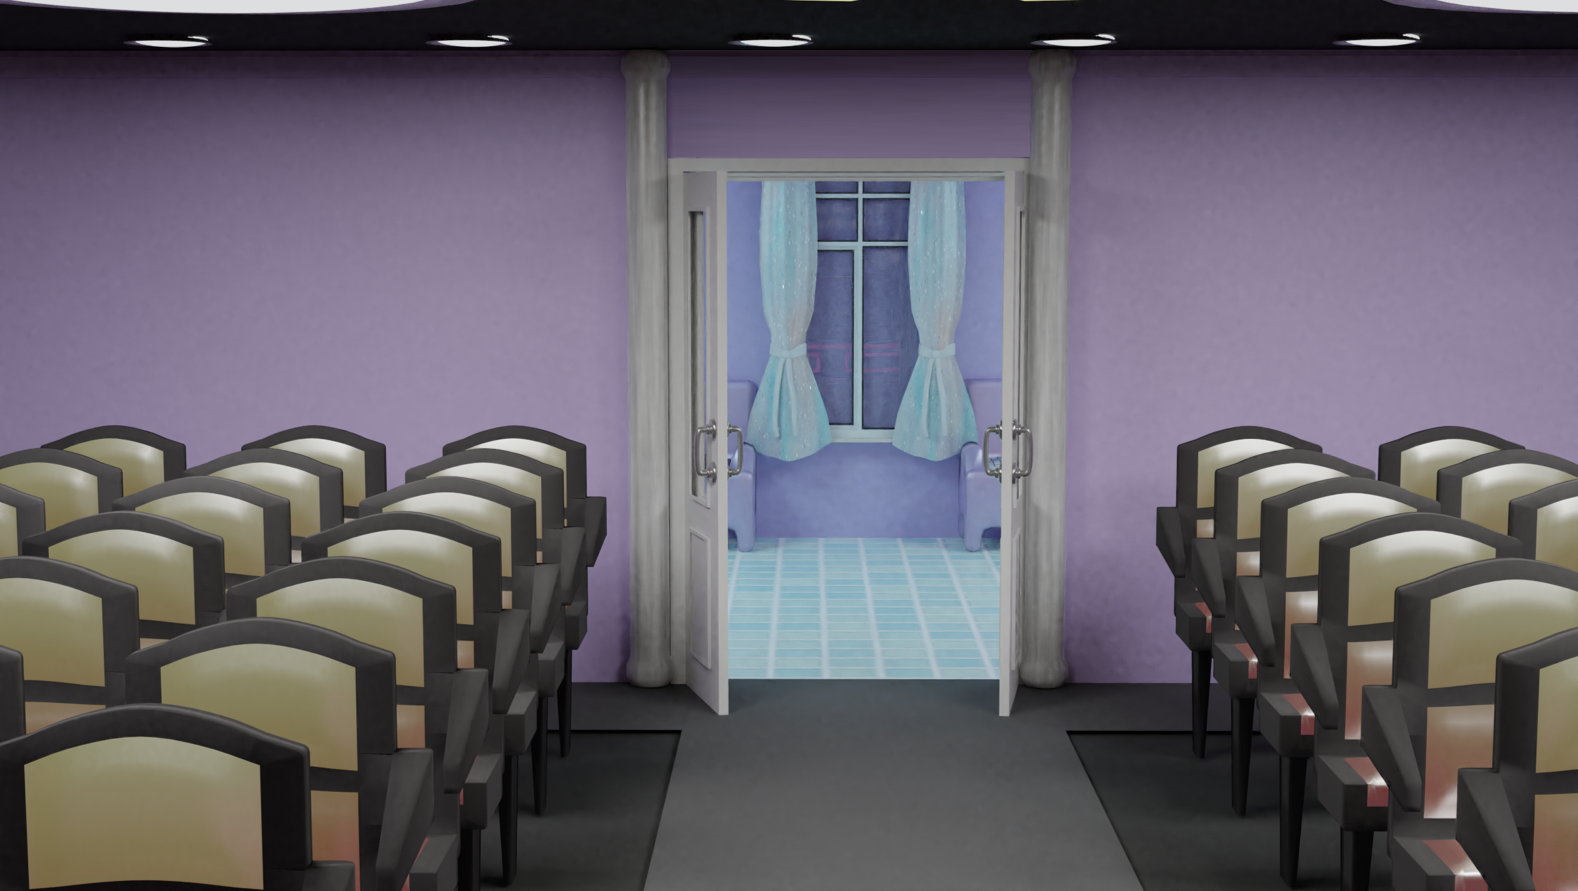 Image description: A view of the auditorium entrance and exit. The door is white with a pair of white marble columns to each side on a light purple wall. The floor is dark gray with a lighter gray strip in the middle aisle, and to the sides are rows of seats. The door is wide open to reveal part of the hallway outside with light blue tiles, a light purple wall, and a window with metallic silver curtains.